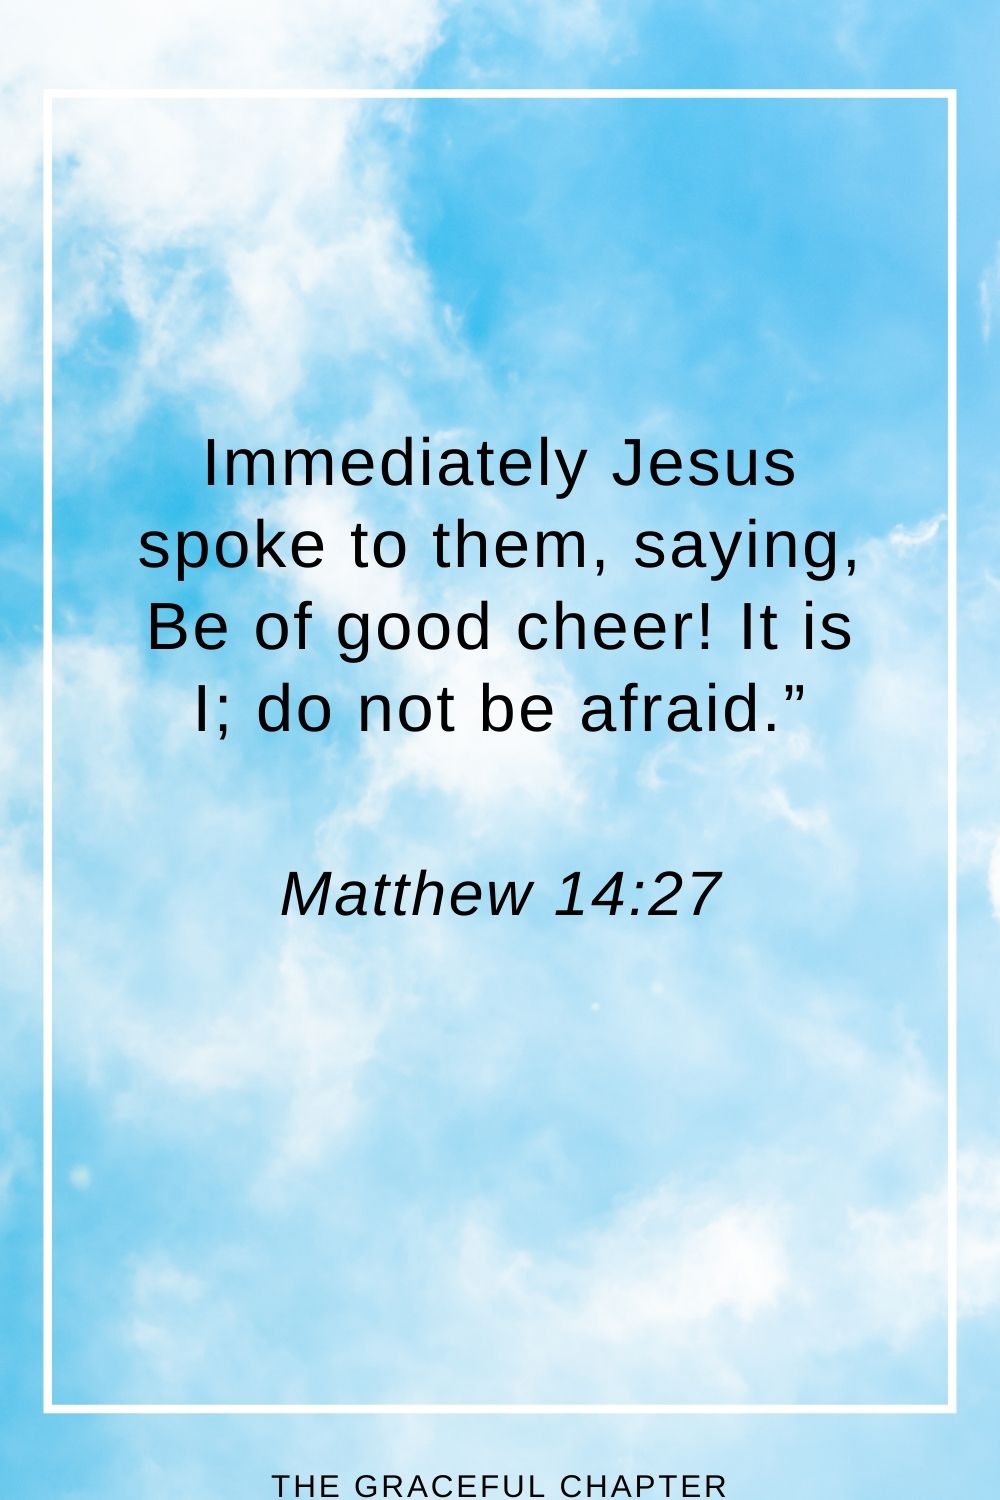 Immediately Jesus spoke to them, saying, Be of good cheer! It is I; do not be afraid.” Matthew 14:27